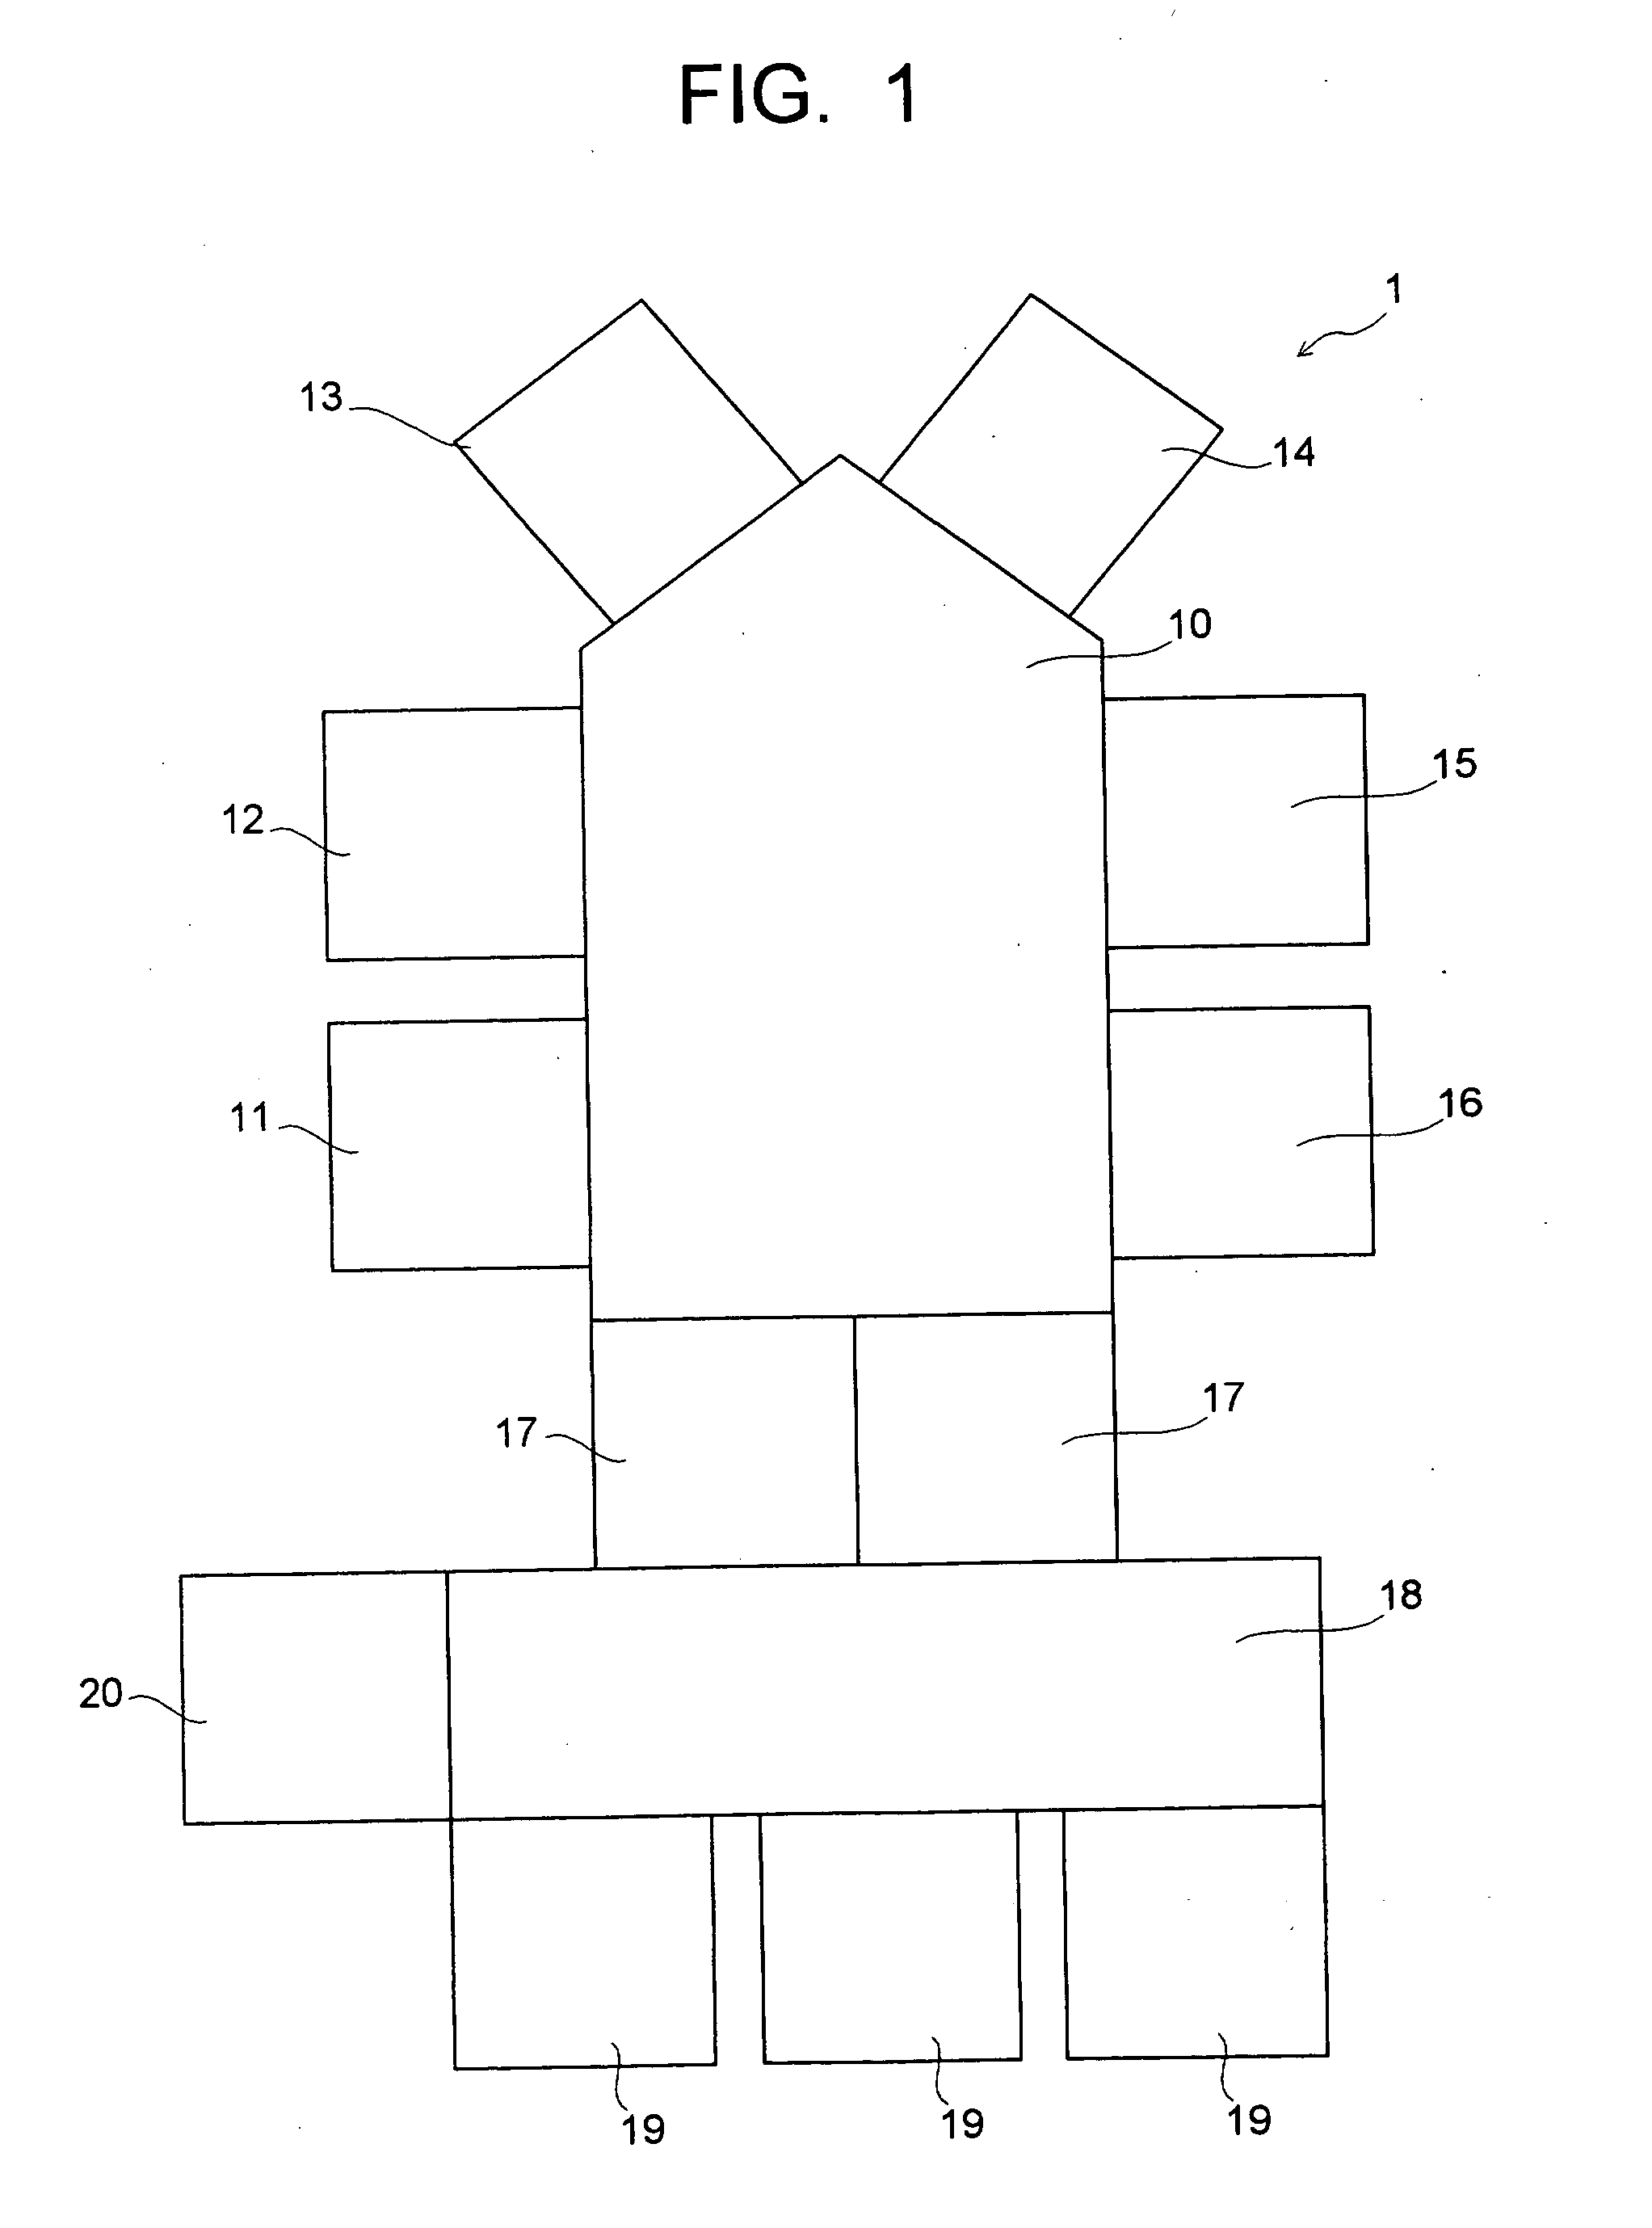 Substrate processing apparatus and transfer positioning method thereof